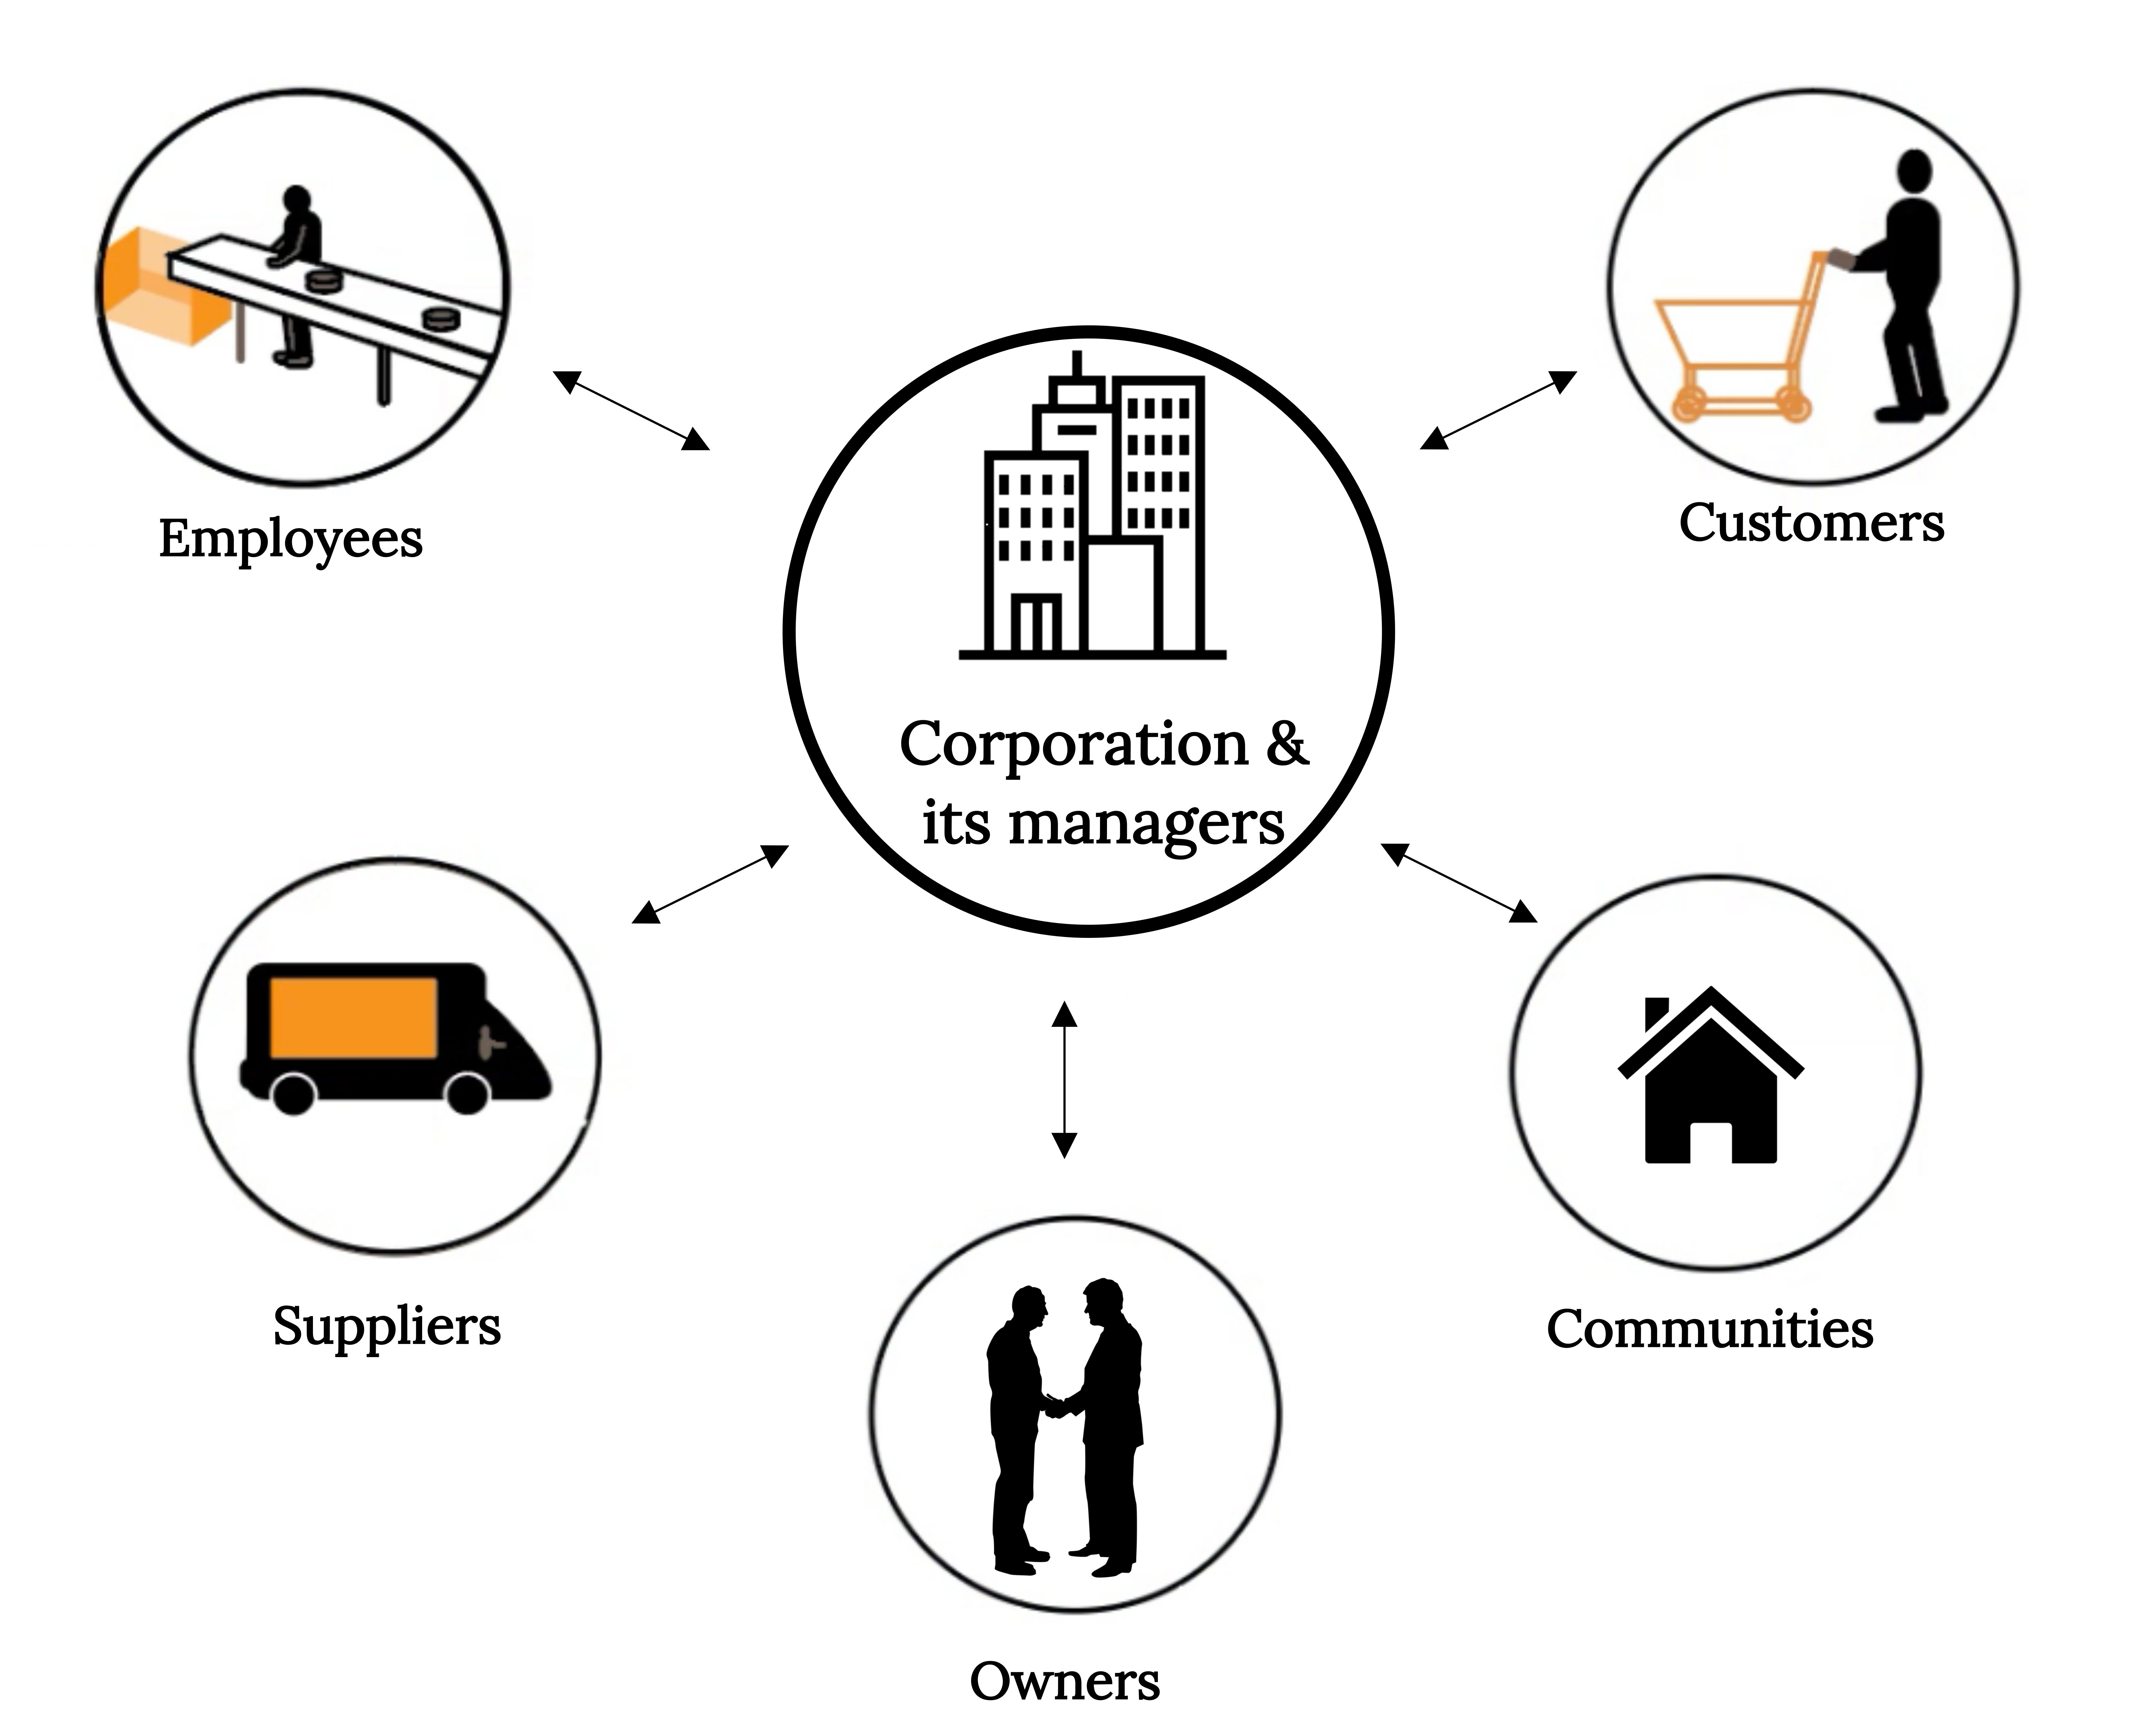 Five circles surround one circle in the middle, with double arrows between the middle circle and the other circles. The middle circle has an icon of a building with two people beside it, representing “The Corporation and its managers.” The first surrounding picture entails two people in business attire, labeled “Owners.” The next circle shows a person pushing a shopping cart, labeled “Customers.” The third circle shows three houses connected by a road, labeled “Communities.” The fourth circle shows a truck on a road, labeled “Suppliers.” The last circle shows two people working on an assembly line, labeled “Employees.”